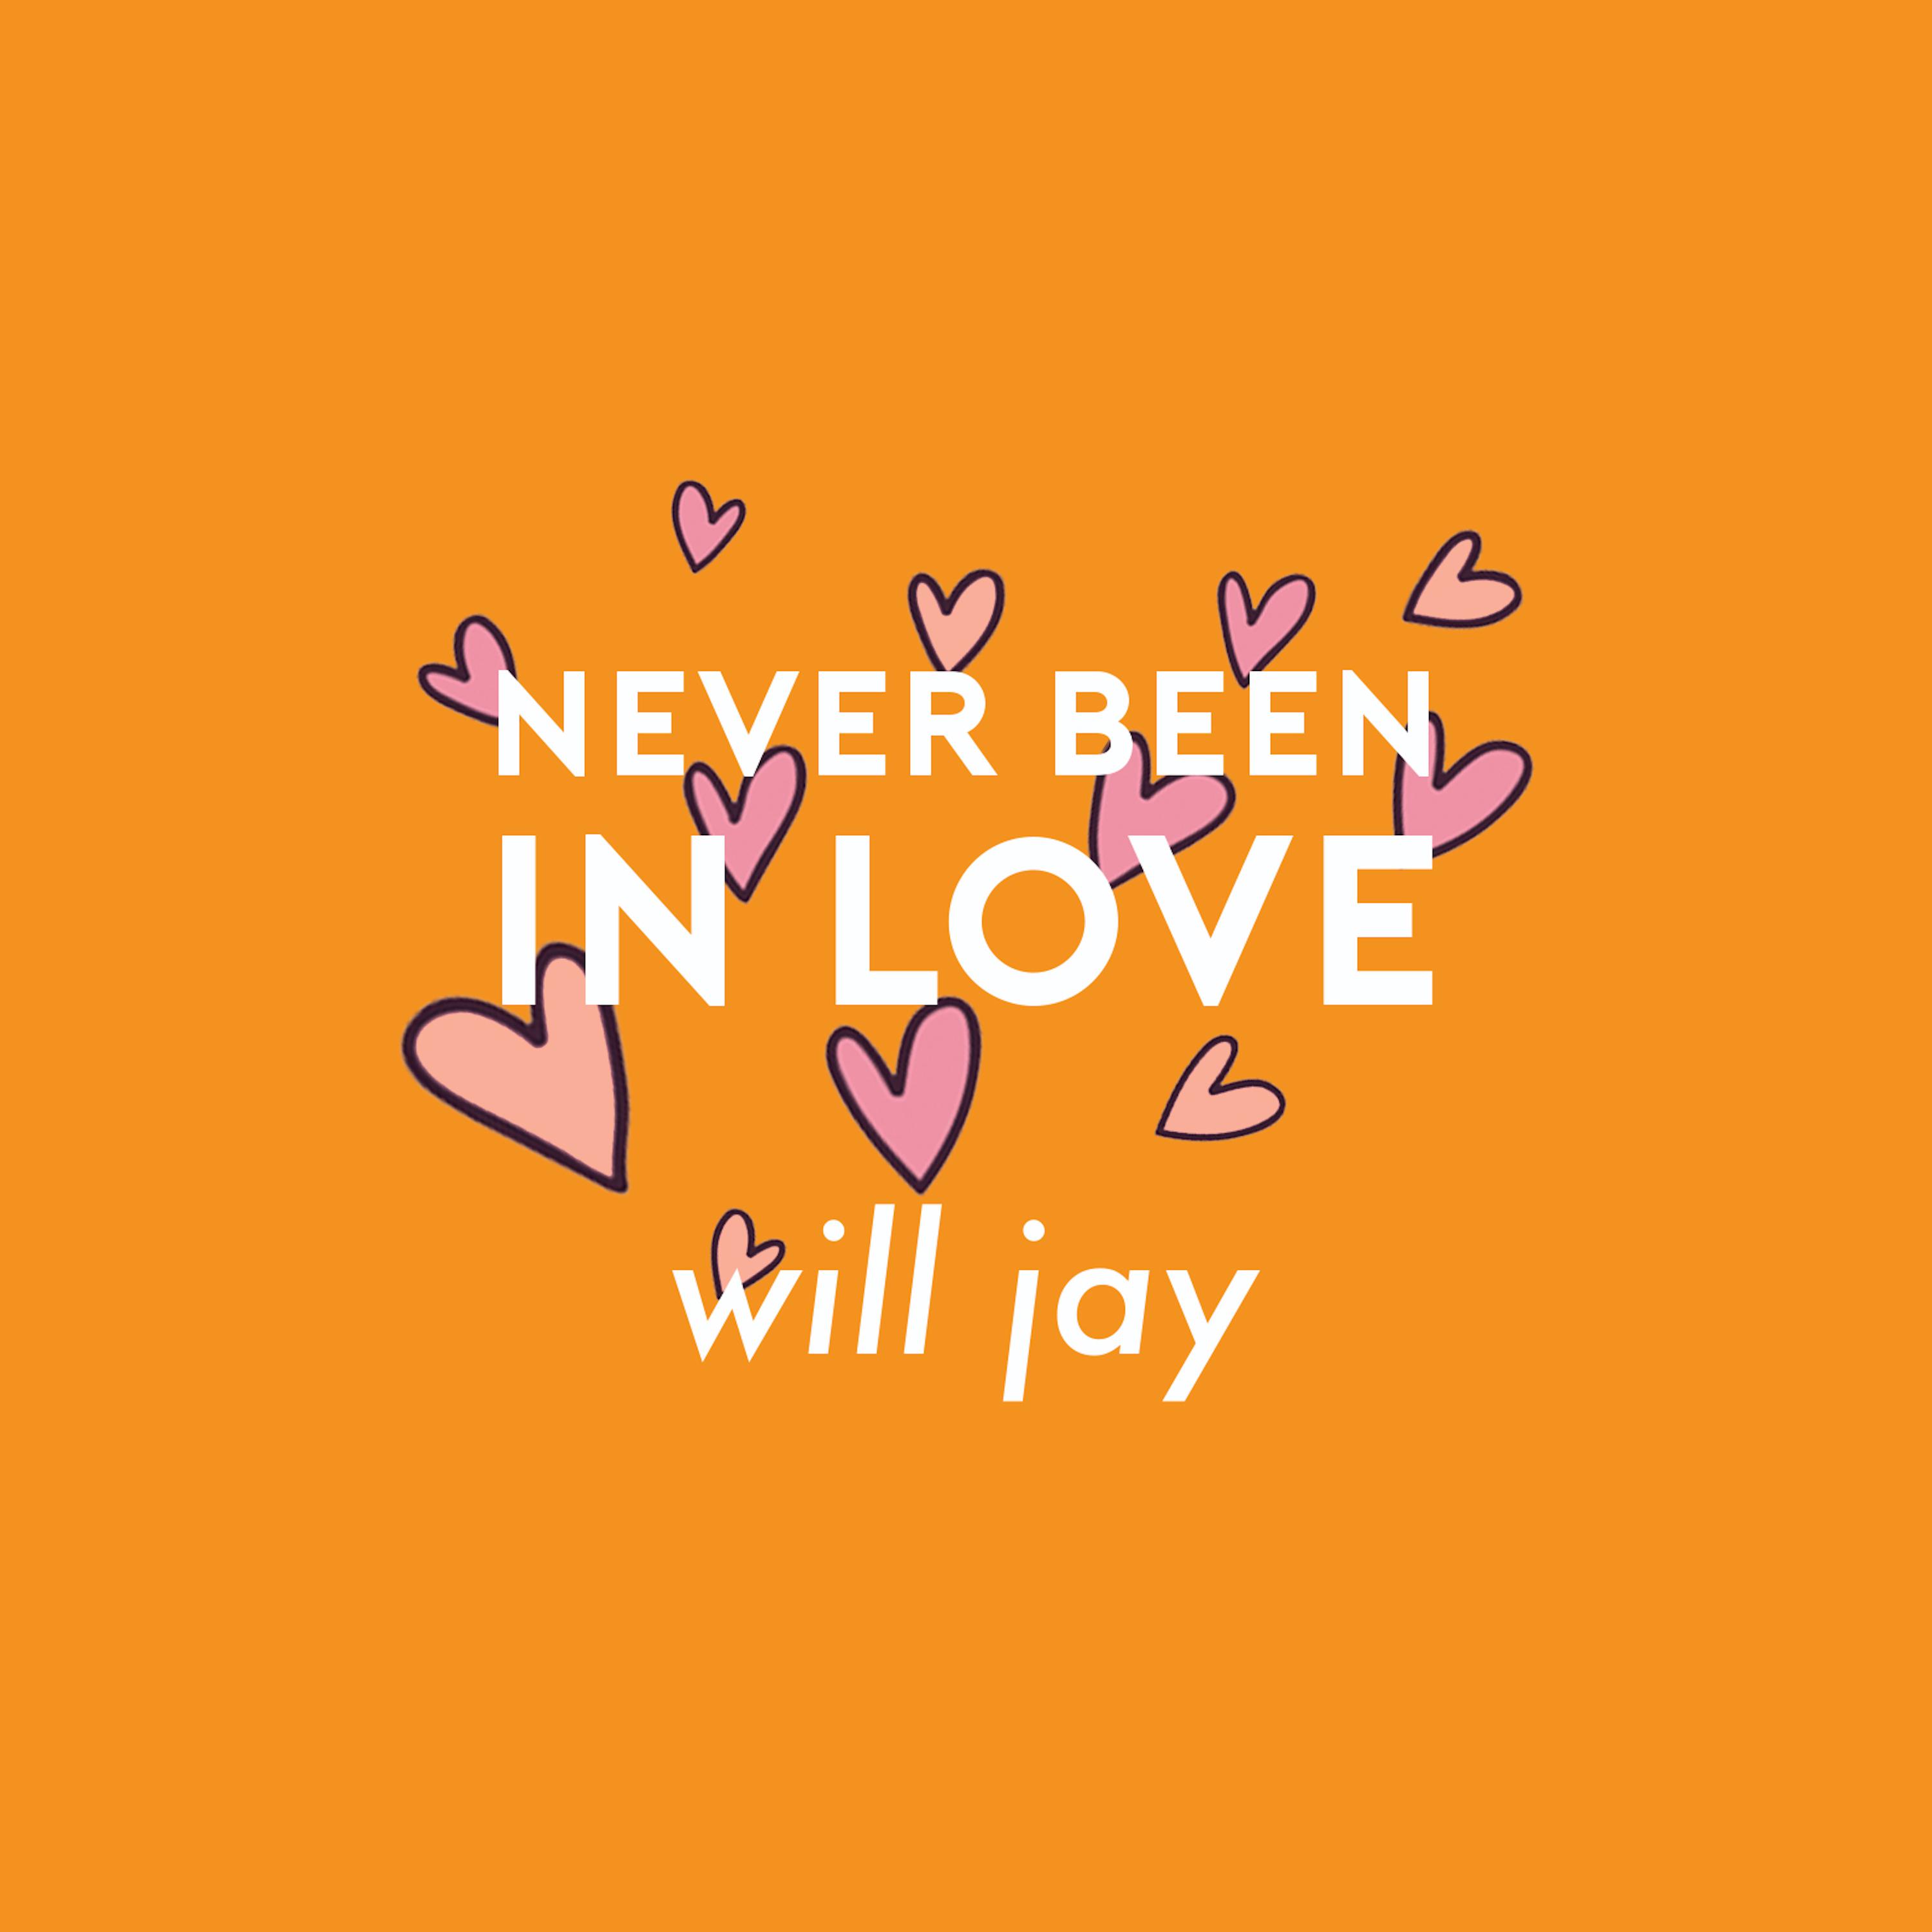 Never Been In Love歌词 歌手Will Jay-专辑Never Been In Love-单曲《Never Been In Love》LRC歌词下载